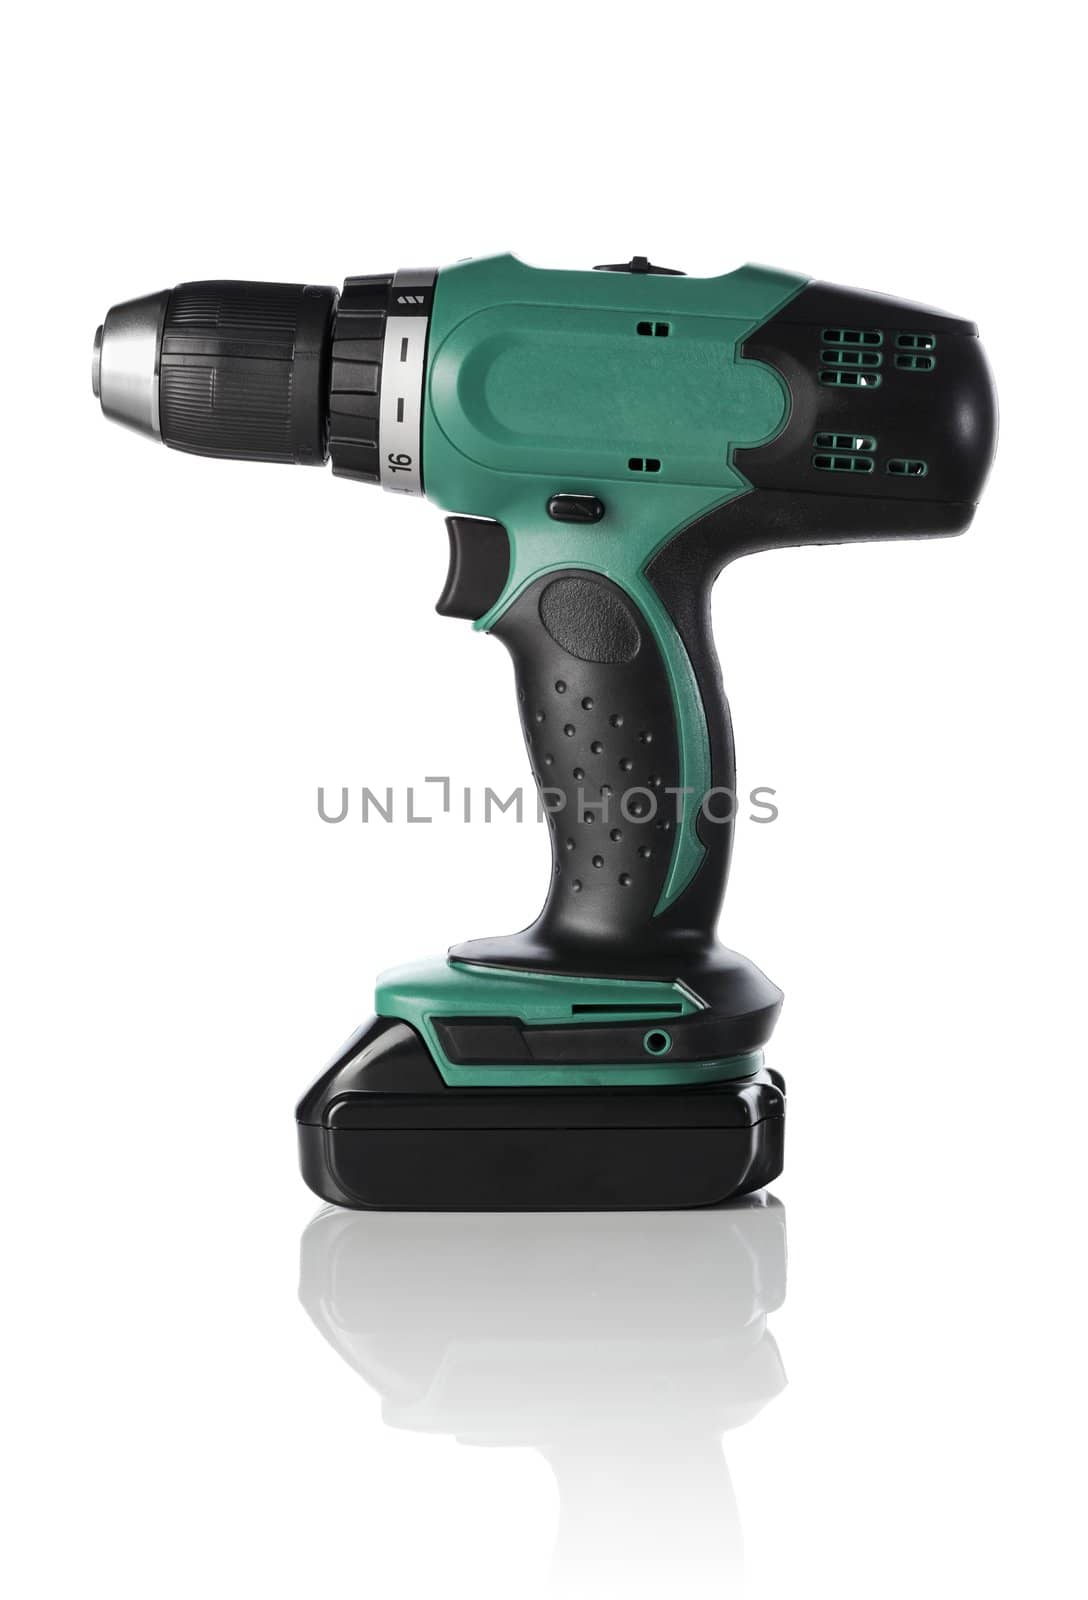 Cordless Drill by Stocksnapper